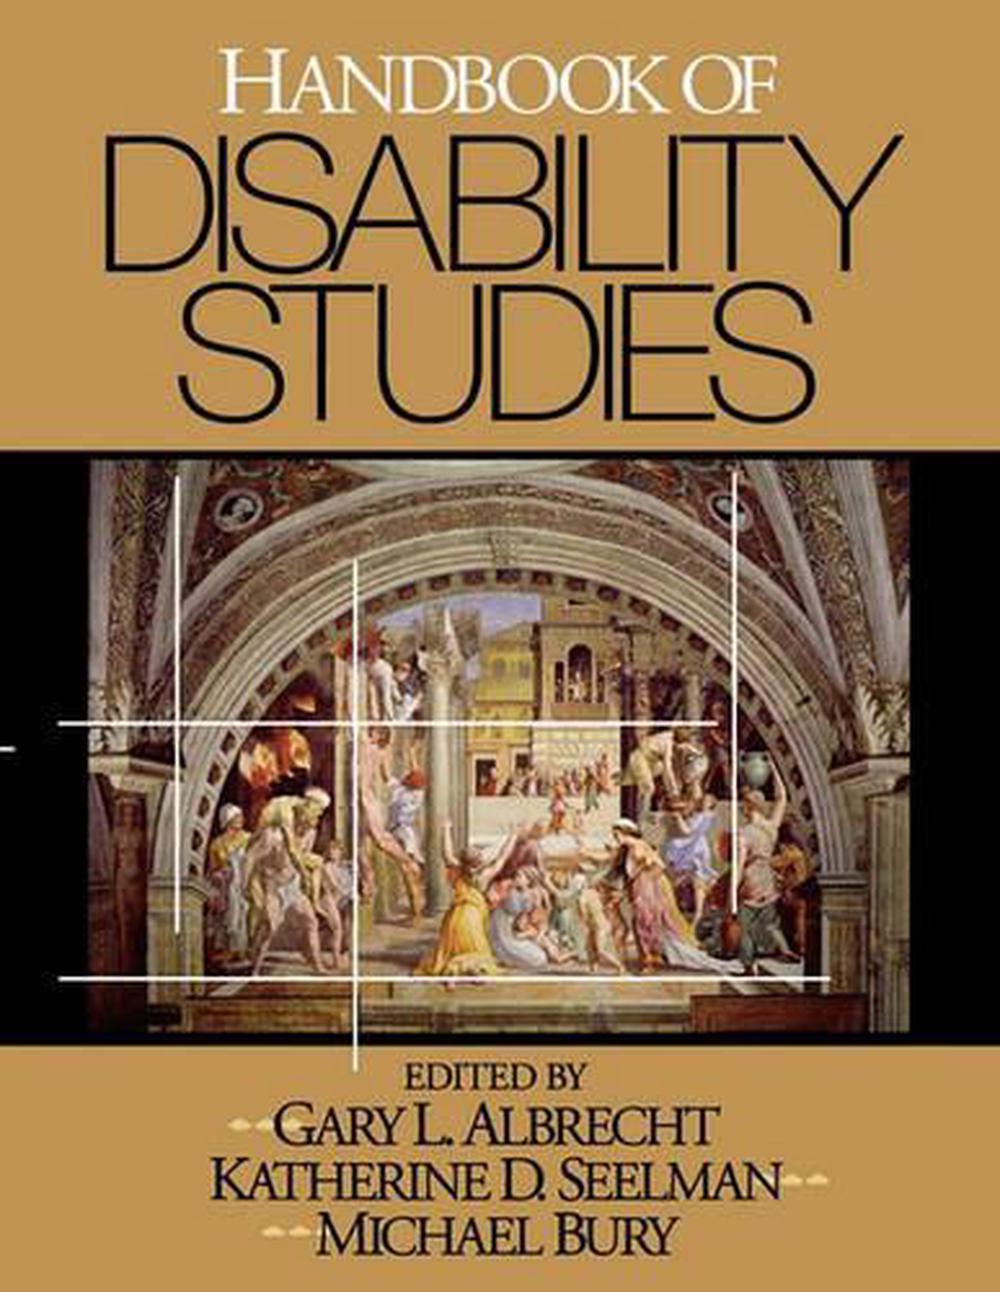 Handbook of Disability Studies by Gary L. Albrecht (English) Paperback Book Free 9780761928744